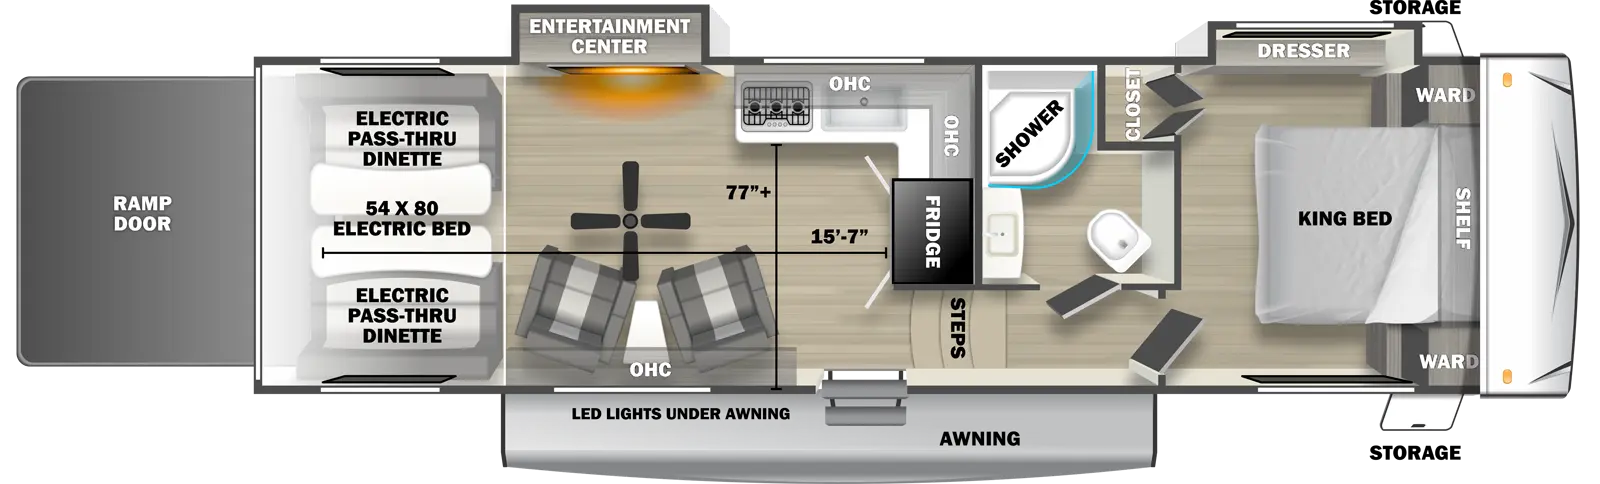 The 2800RLT fifth wheel has 2 slide outs on the off-door side, 1 entry door and 1 rear ramp door. Exterior features include an awning with LED lights and front opposing side storage access. Interior layout from front to back includes front bedroom with foot-facing King bed, shelf over the bed, front corner wardrobes, front facing closet and off-door side slideout holding a dresser; off-door side bathroom with radius shower, toilet and single sink vanity; 3 steps down into the kitchen area with off-door side L-shaped countertop, stovetop, L-Shaped overhead cabinets, sink and rear facing refrigerator; 2 door side recliners with end table; ceiling fan; off-door side slideout holding and entertainment center; and rear 54 x 80 electric bed over electric pass-through dinette. Cargo length from rear of unit to refrigerator is 15 ft. 7 in. Cargo width from countertop to door side wall is 77 inches.